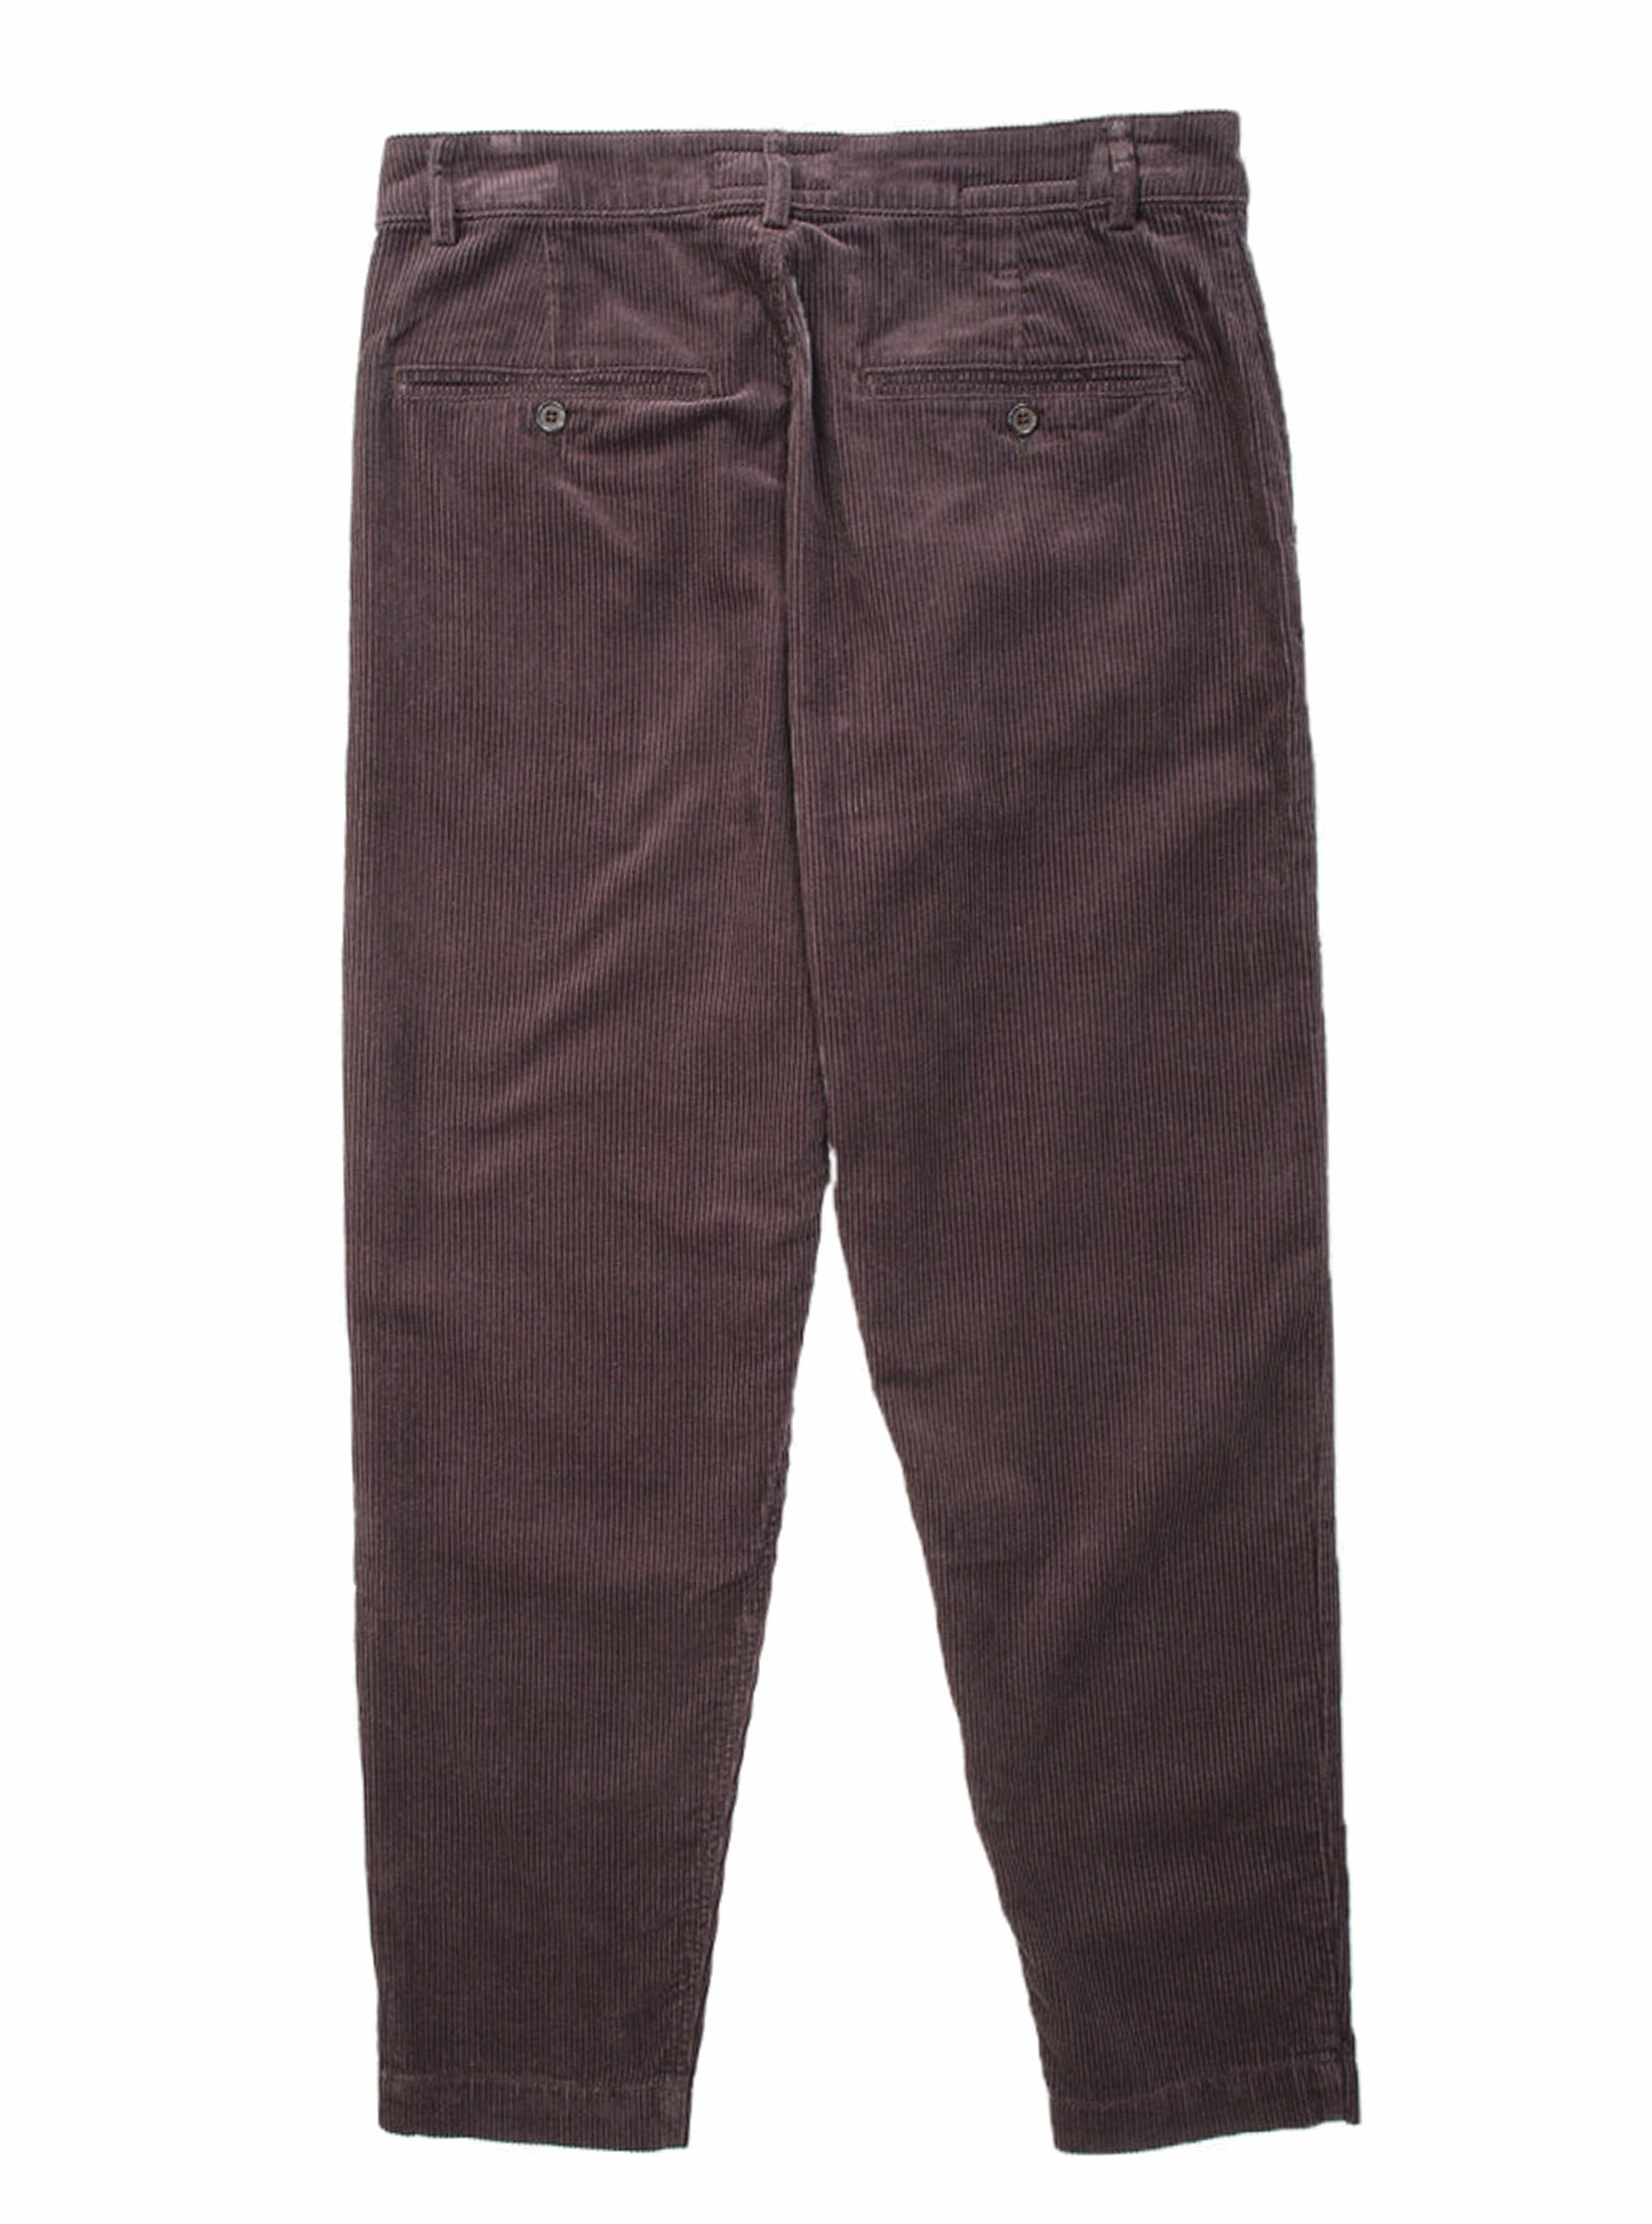 Military Chino - Cord LICORICE
• Product Code: 27532.
• Comfortable, loose fit through the hips and thigh.
• Leg tapers through to hem.
• Mid-rise.
• Button fly.
• Two front pockets.
• Two rear jetted buttoned pockets.
• Fabric Content: 100% Cotton, 100% Cotton trim. UNIVERSAL WORKS